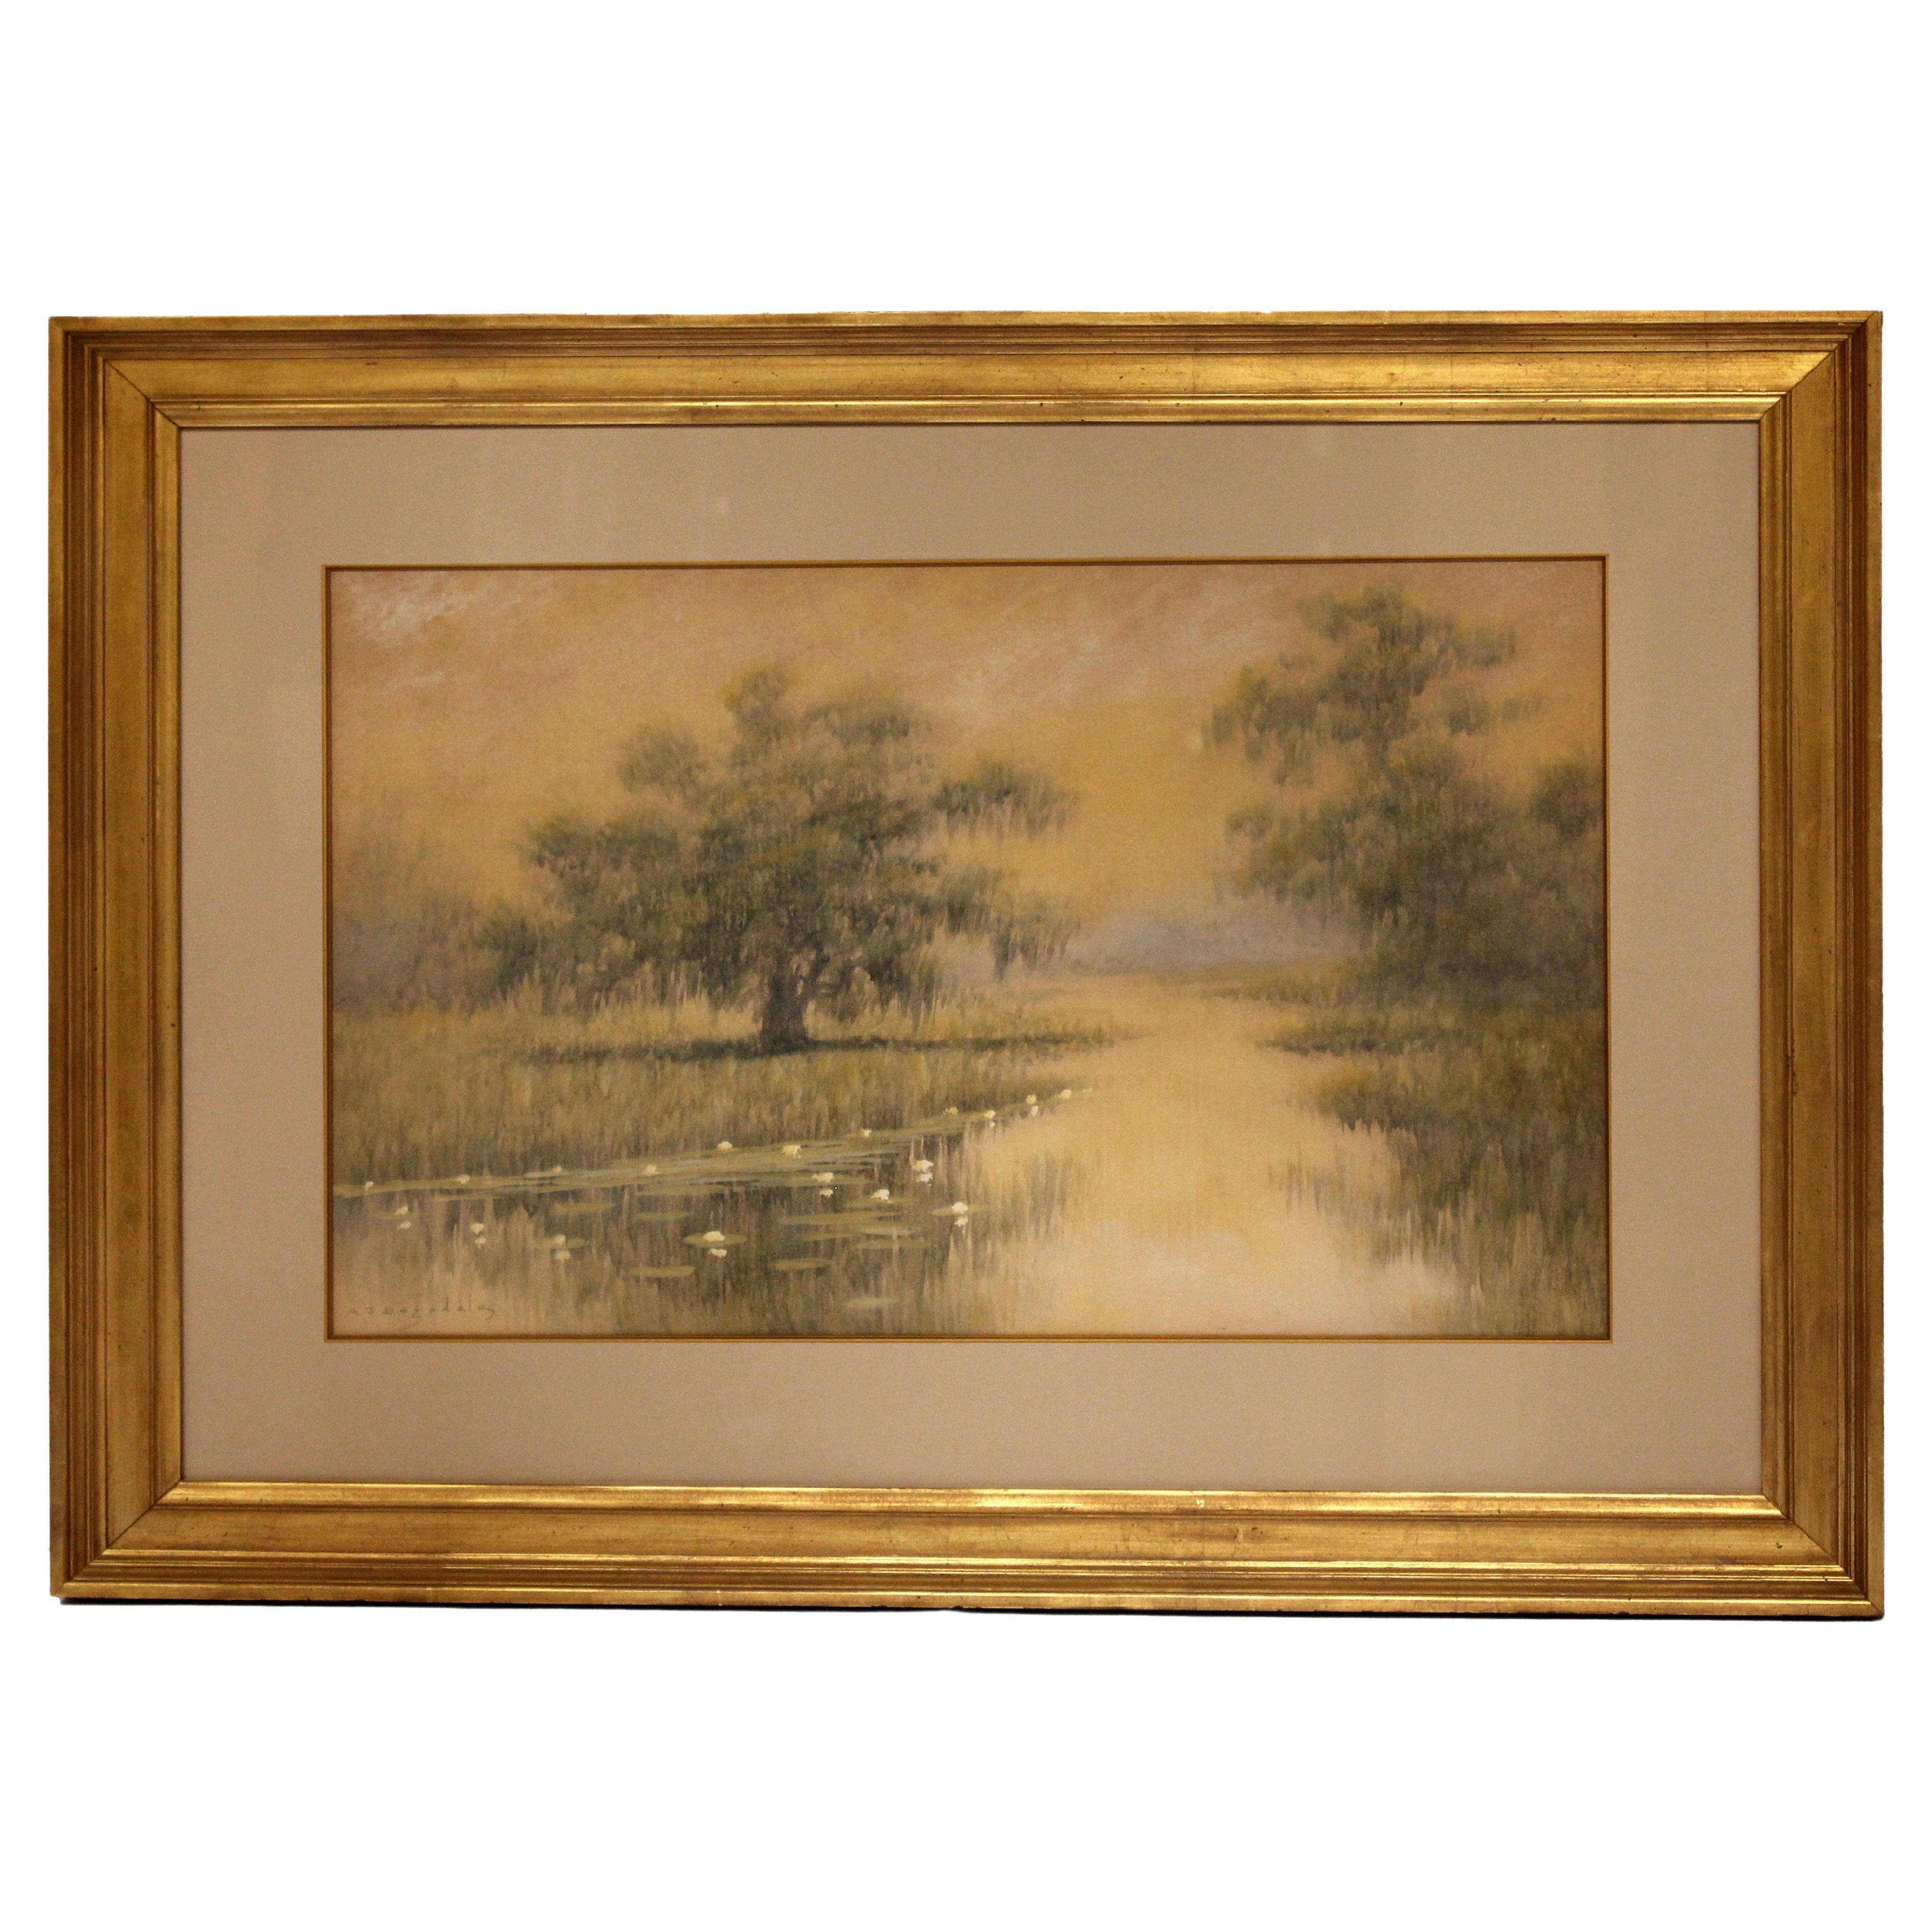 Circa 1915-20 « Live Oaks and Water Lillies on the on the Bayou », par Drysdale en vente